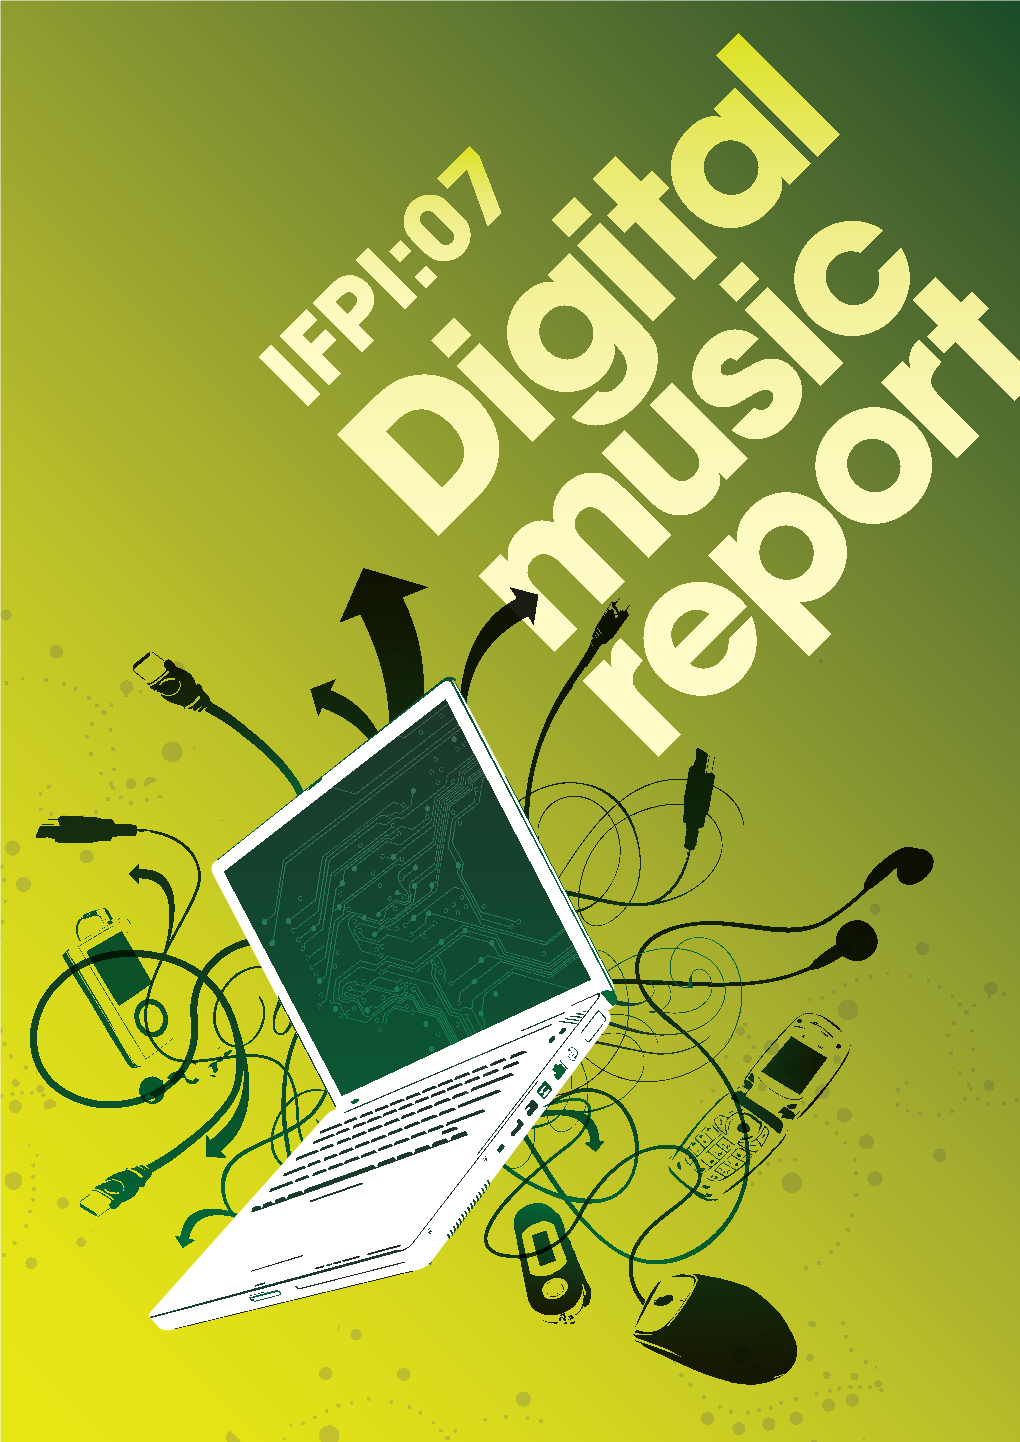 Copyright Remains Key to the Digital Music Business. Digital Market